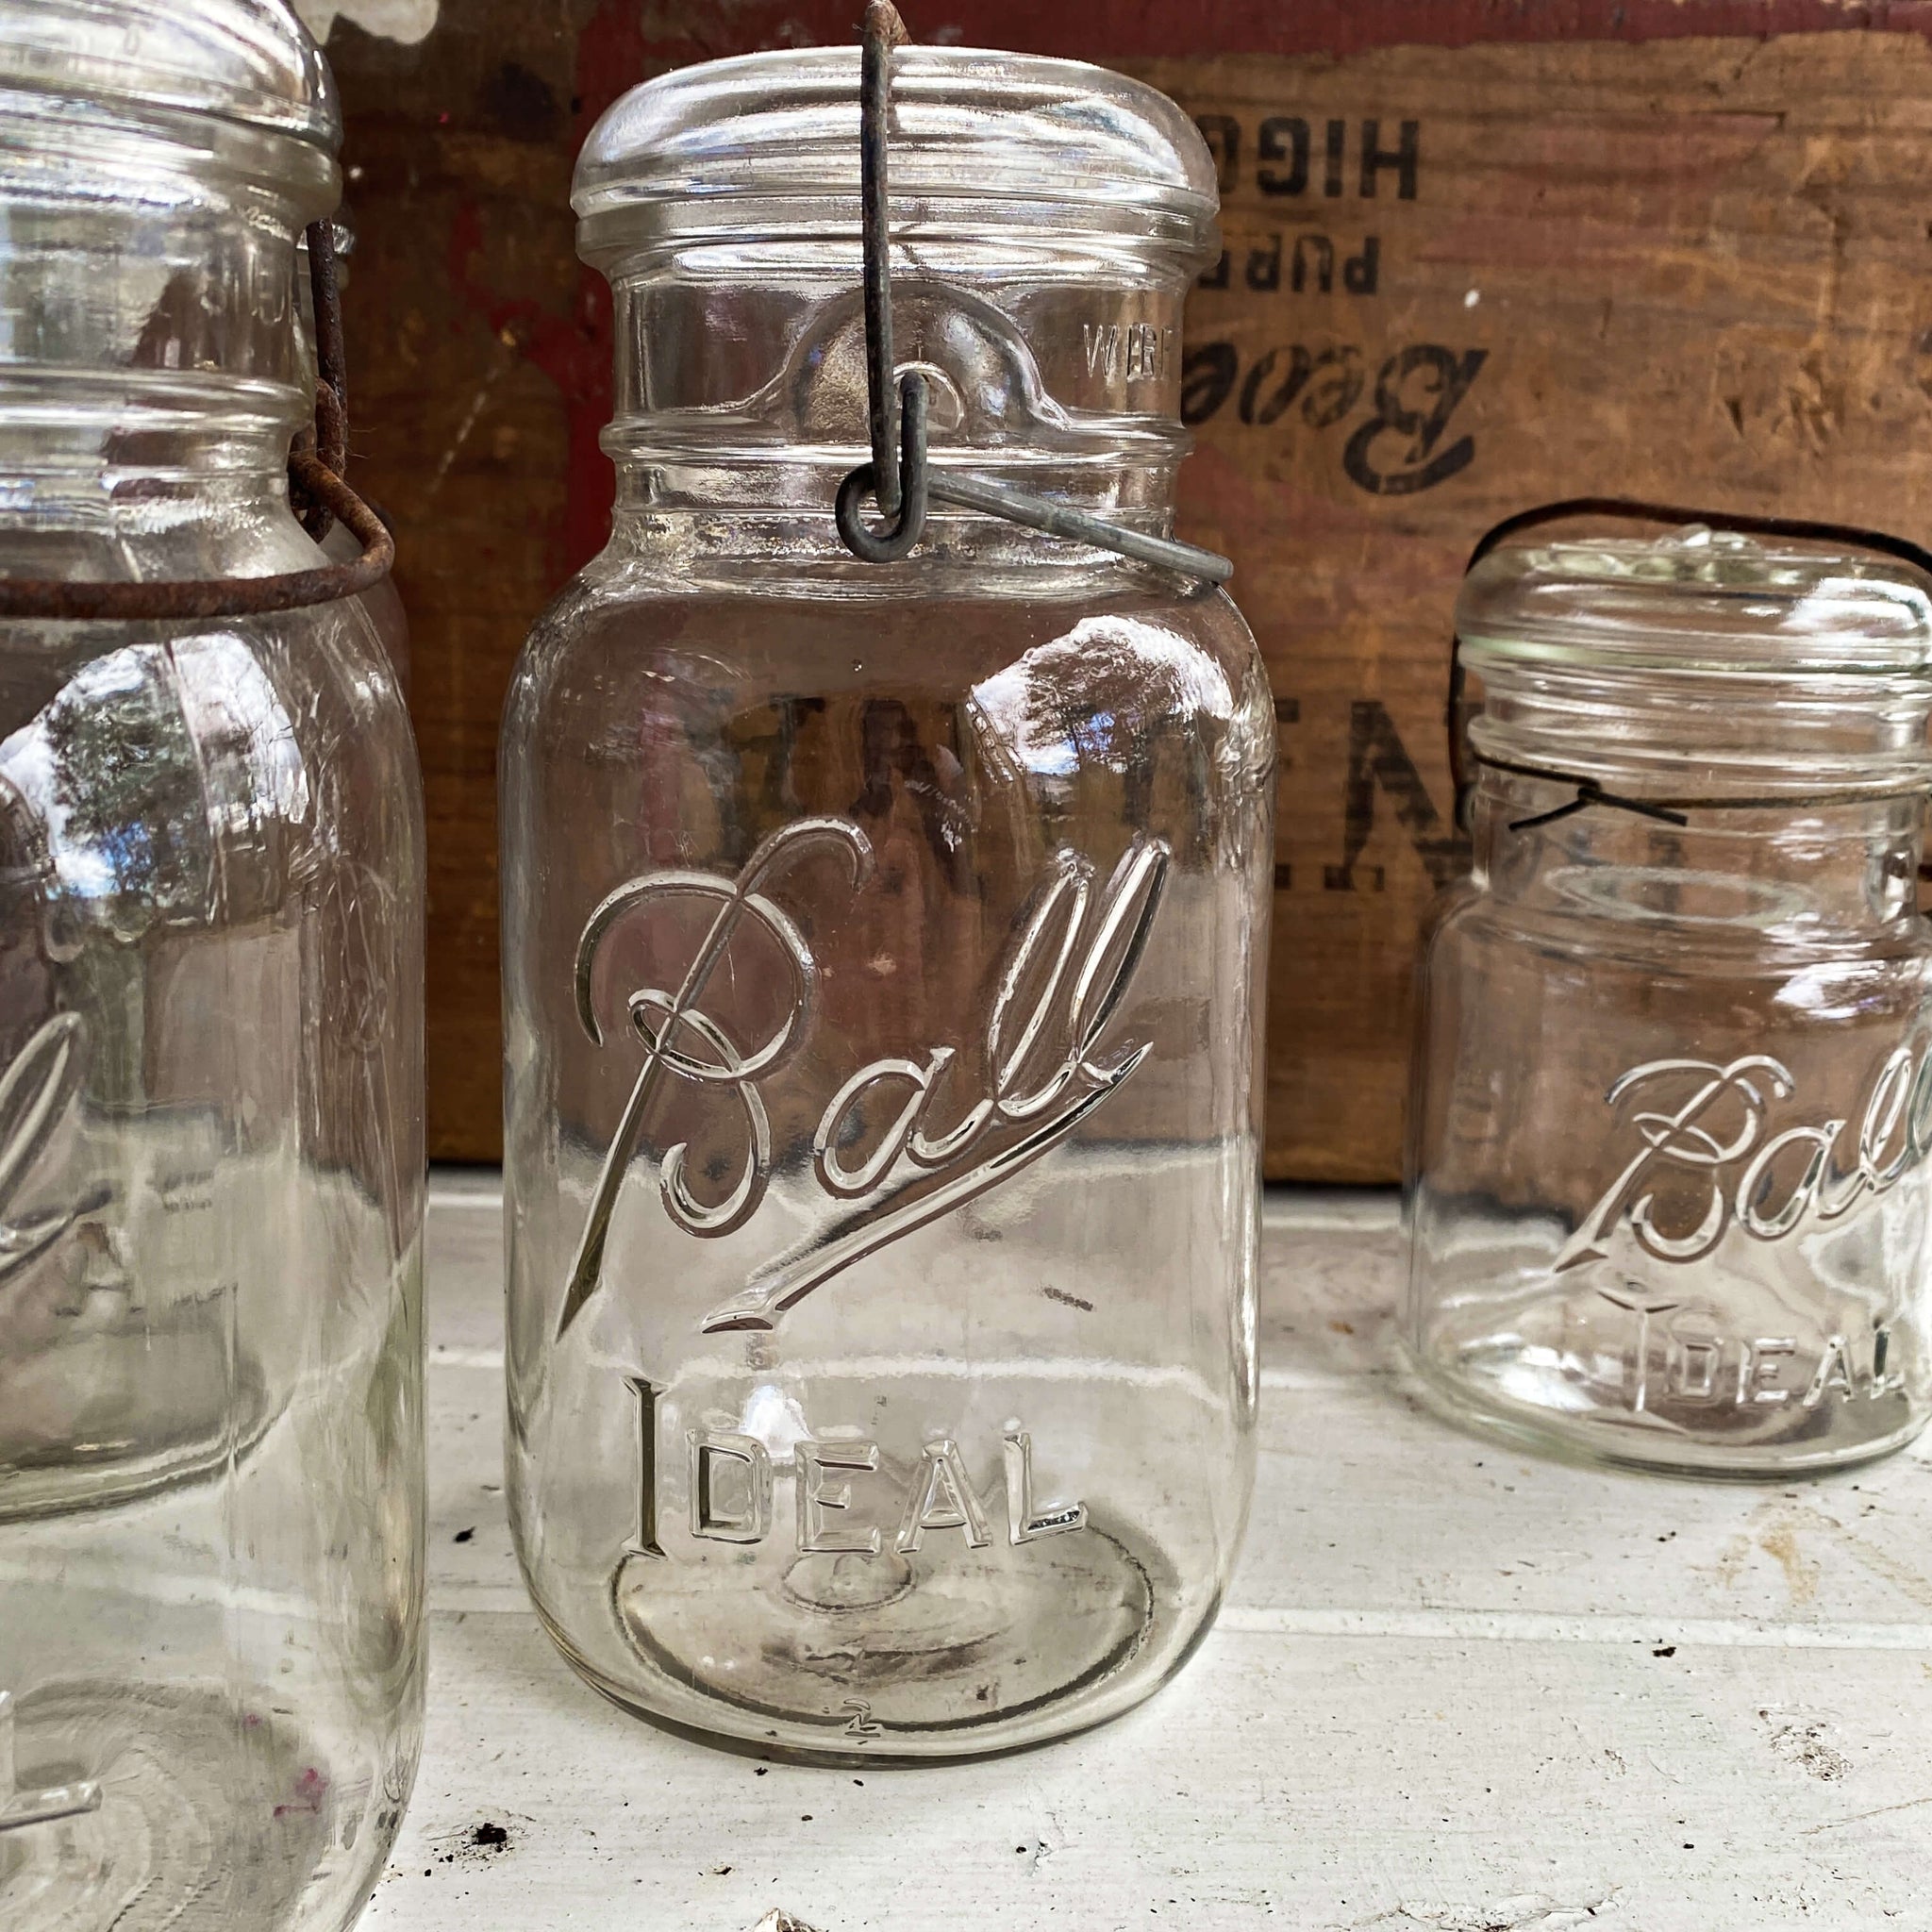 Antique Ball Ideal Canning Jars - Quart and Pint Sizes - 8 Jars